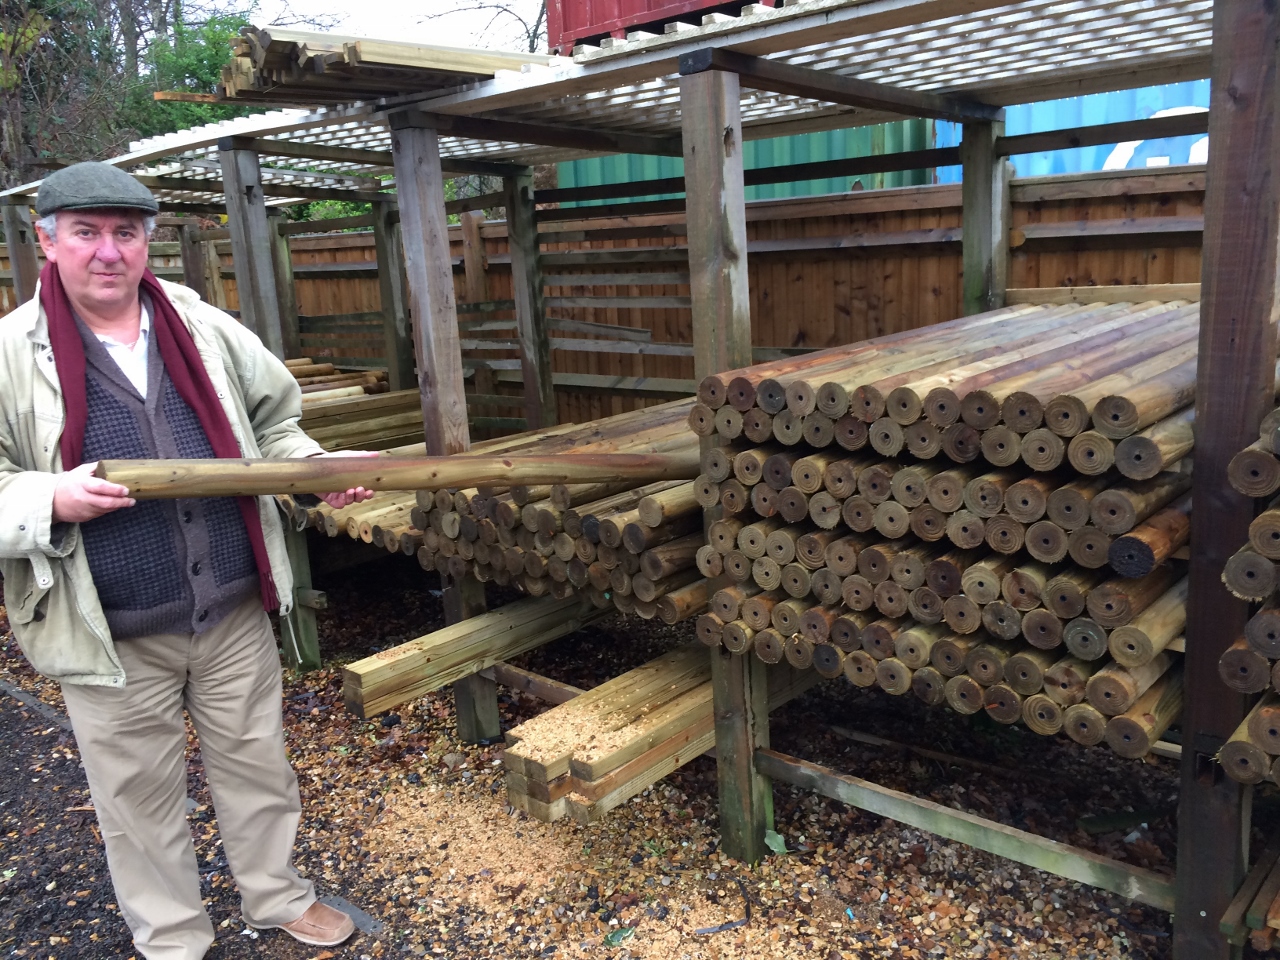 Welsh timber poles keeps those wandering cats from straying